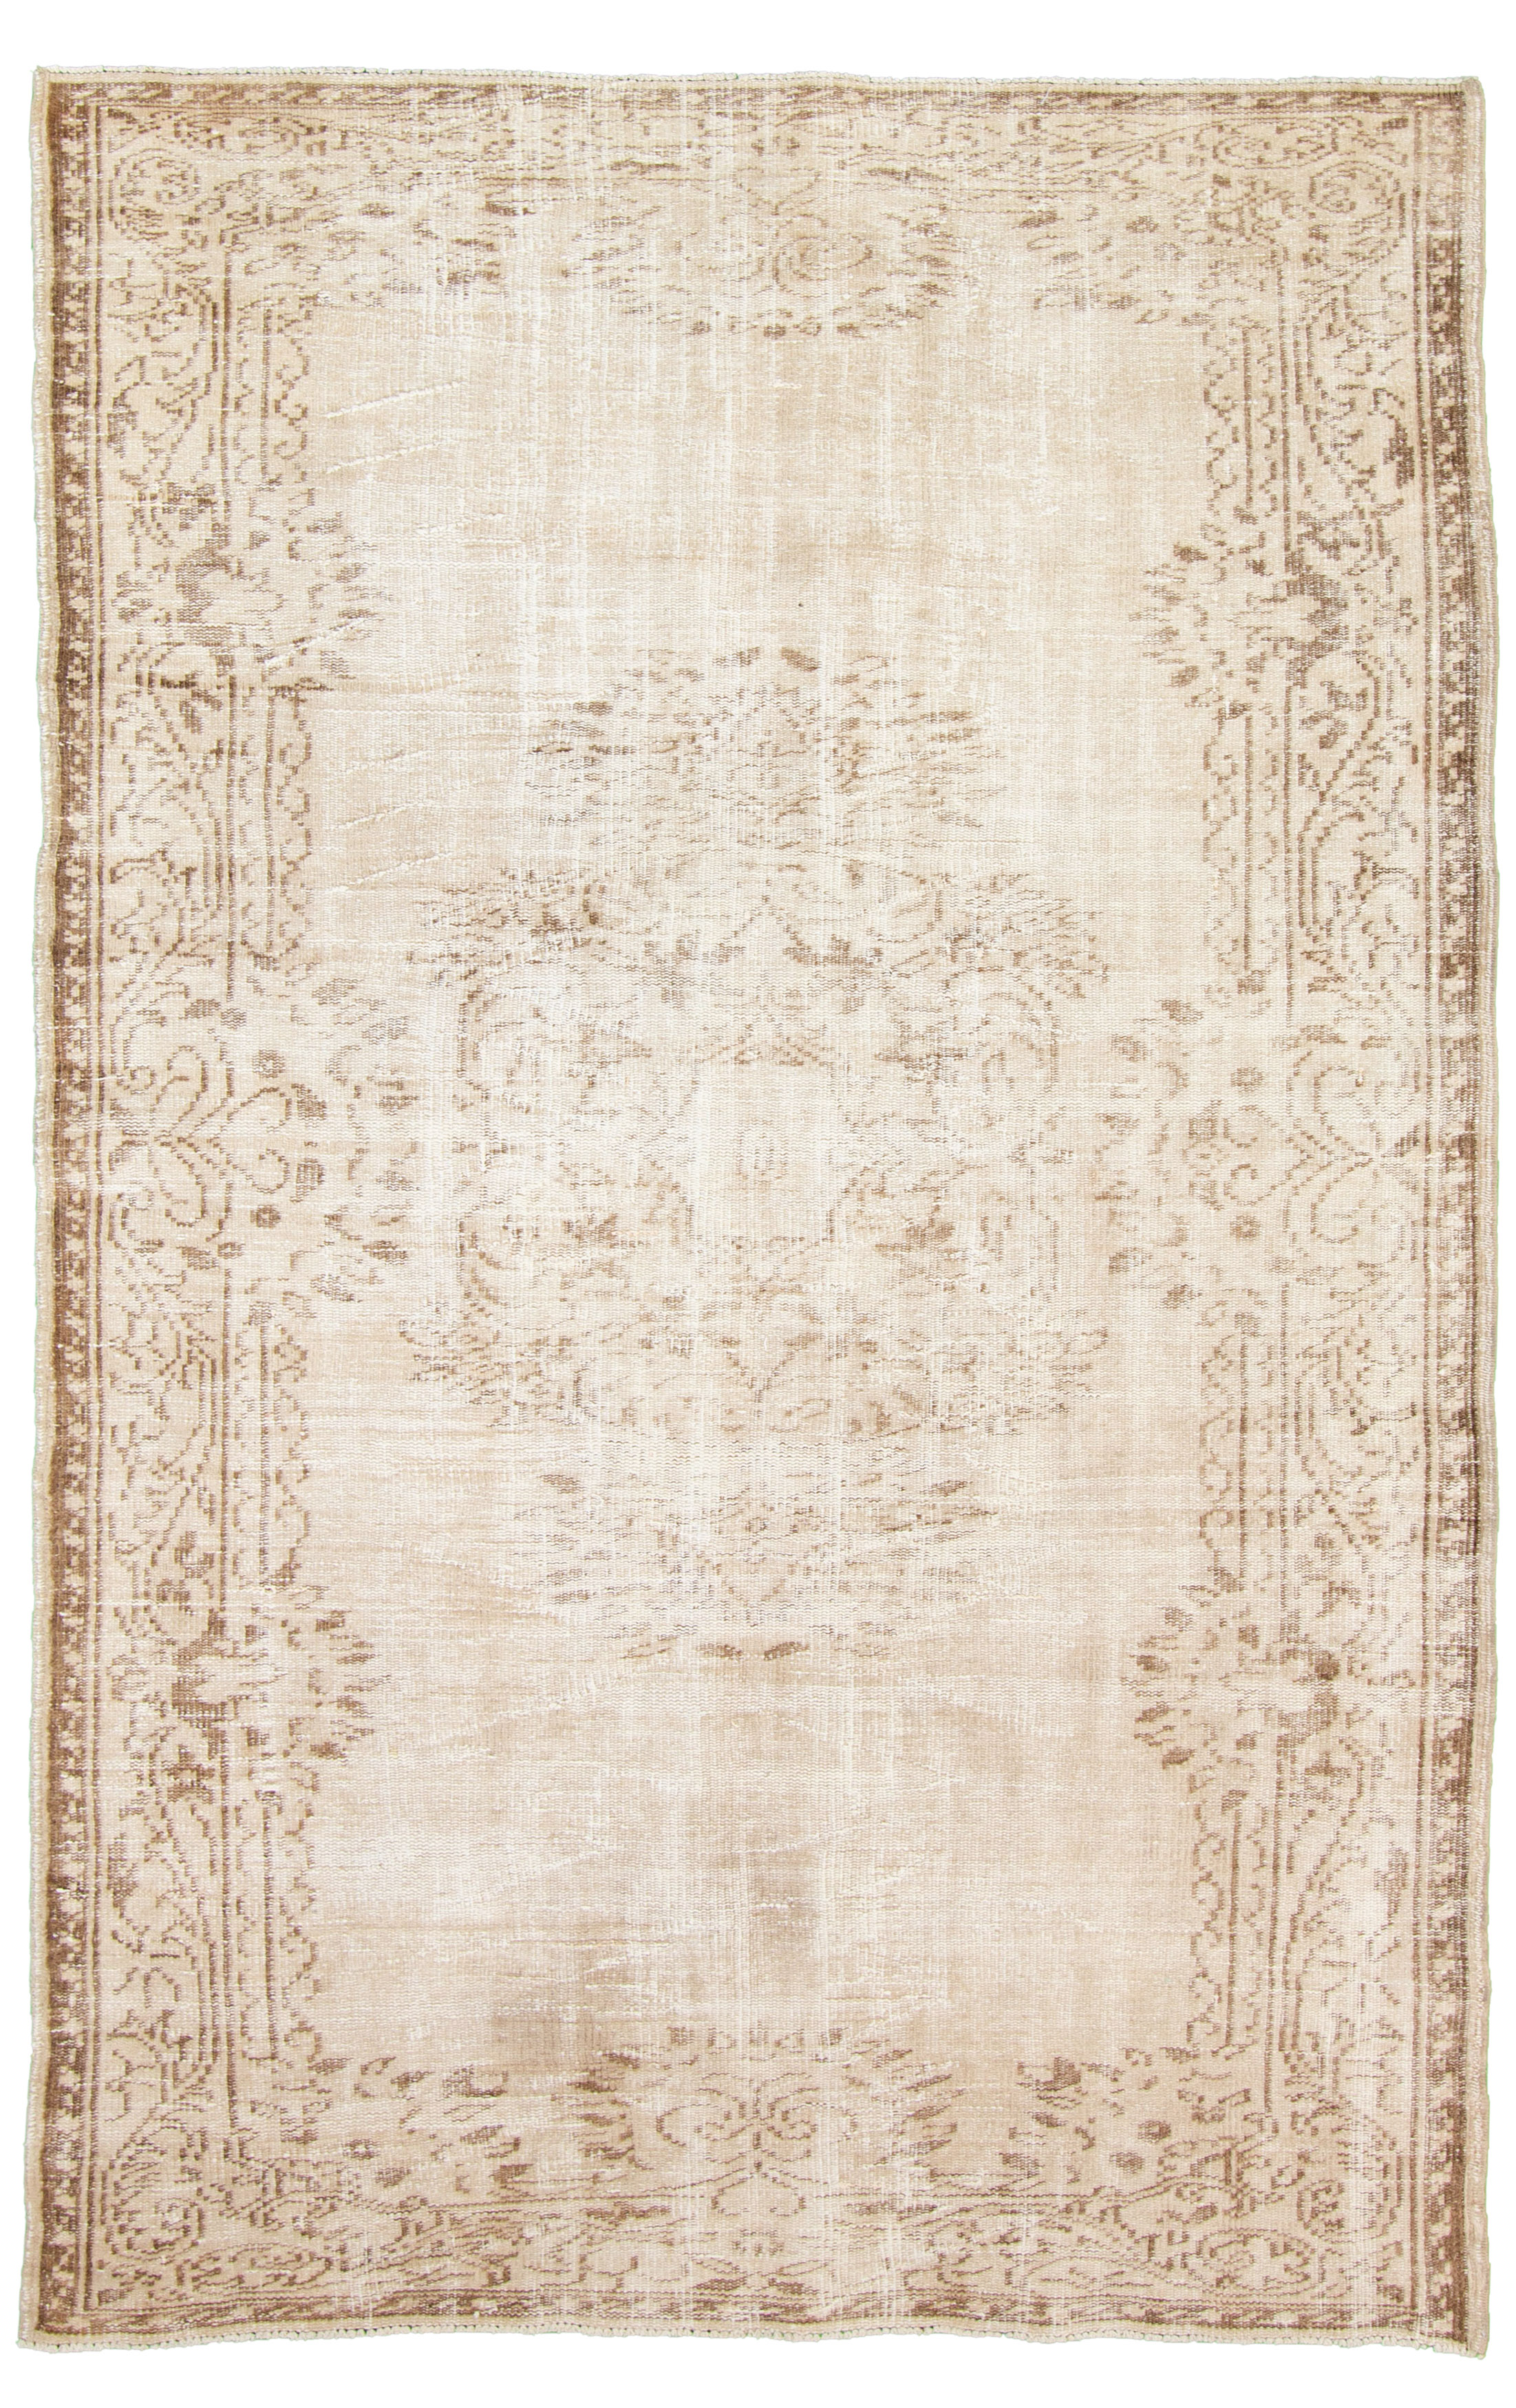 Hand-knotted Antalya Vintage   Rug 8'8" x 5'6" Size: 5'6" x 8'8"  